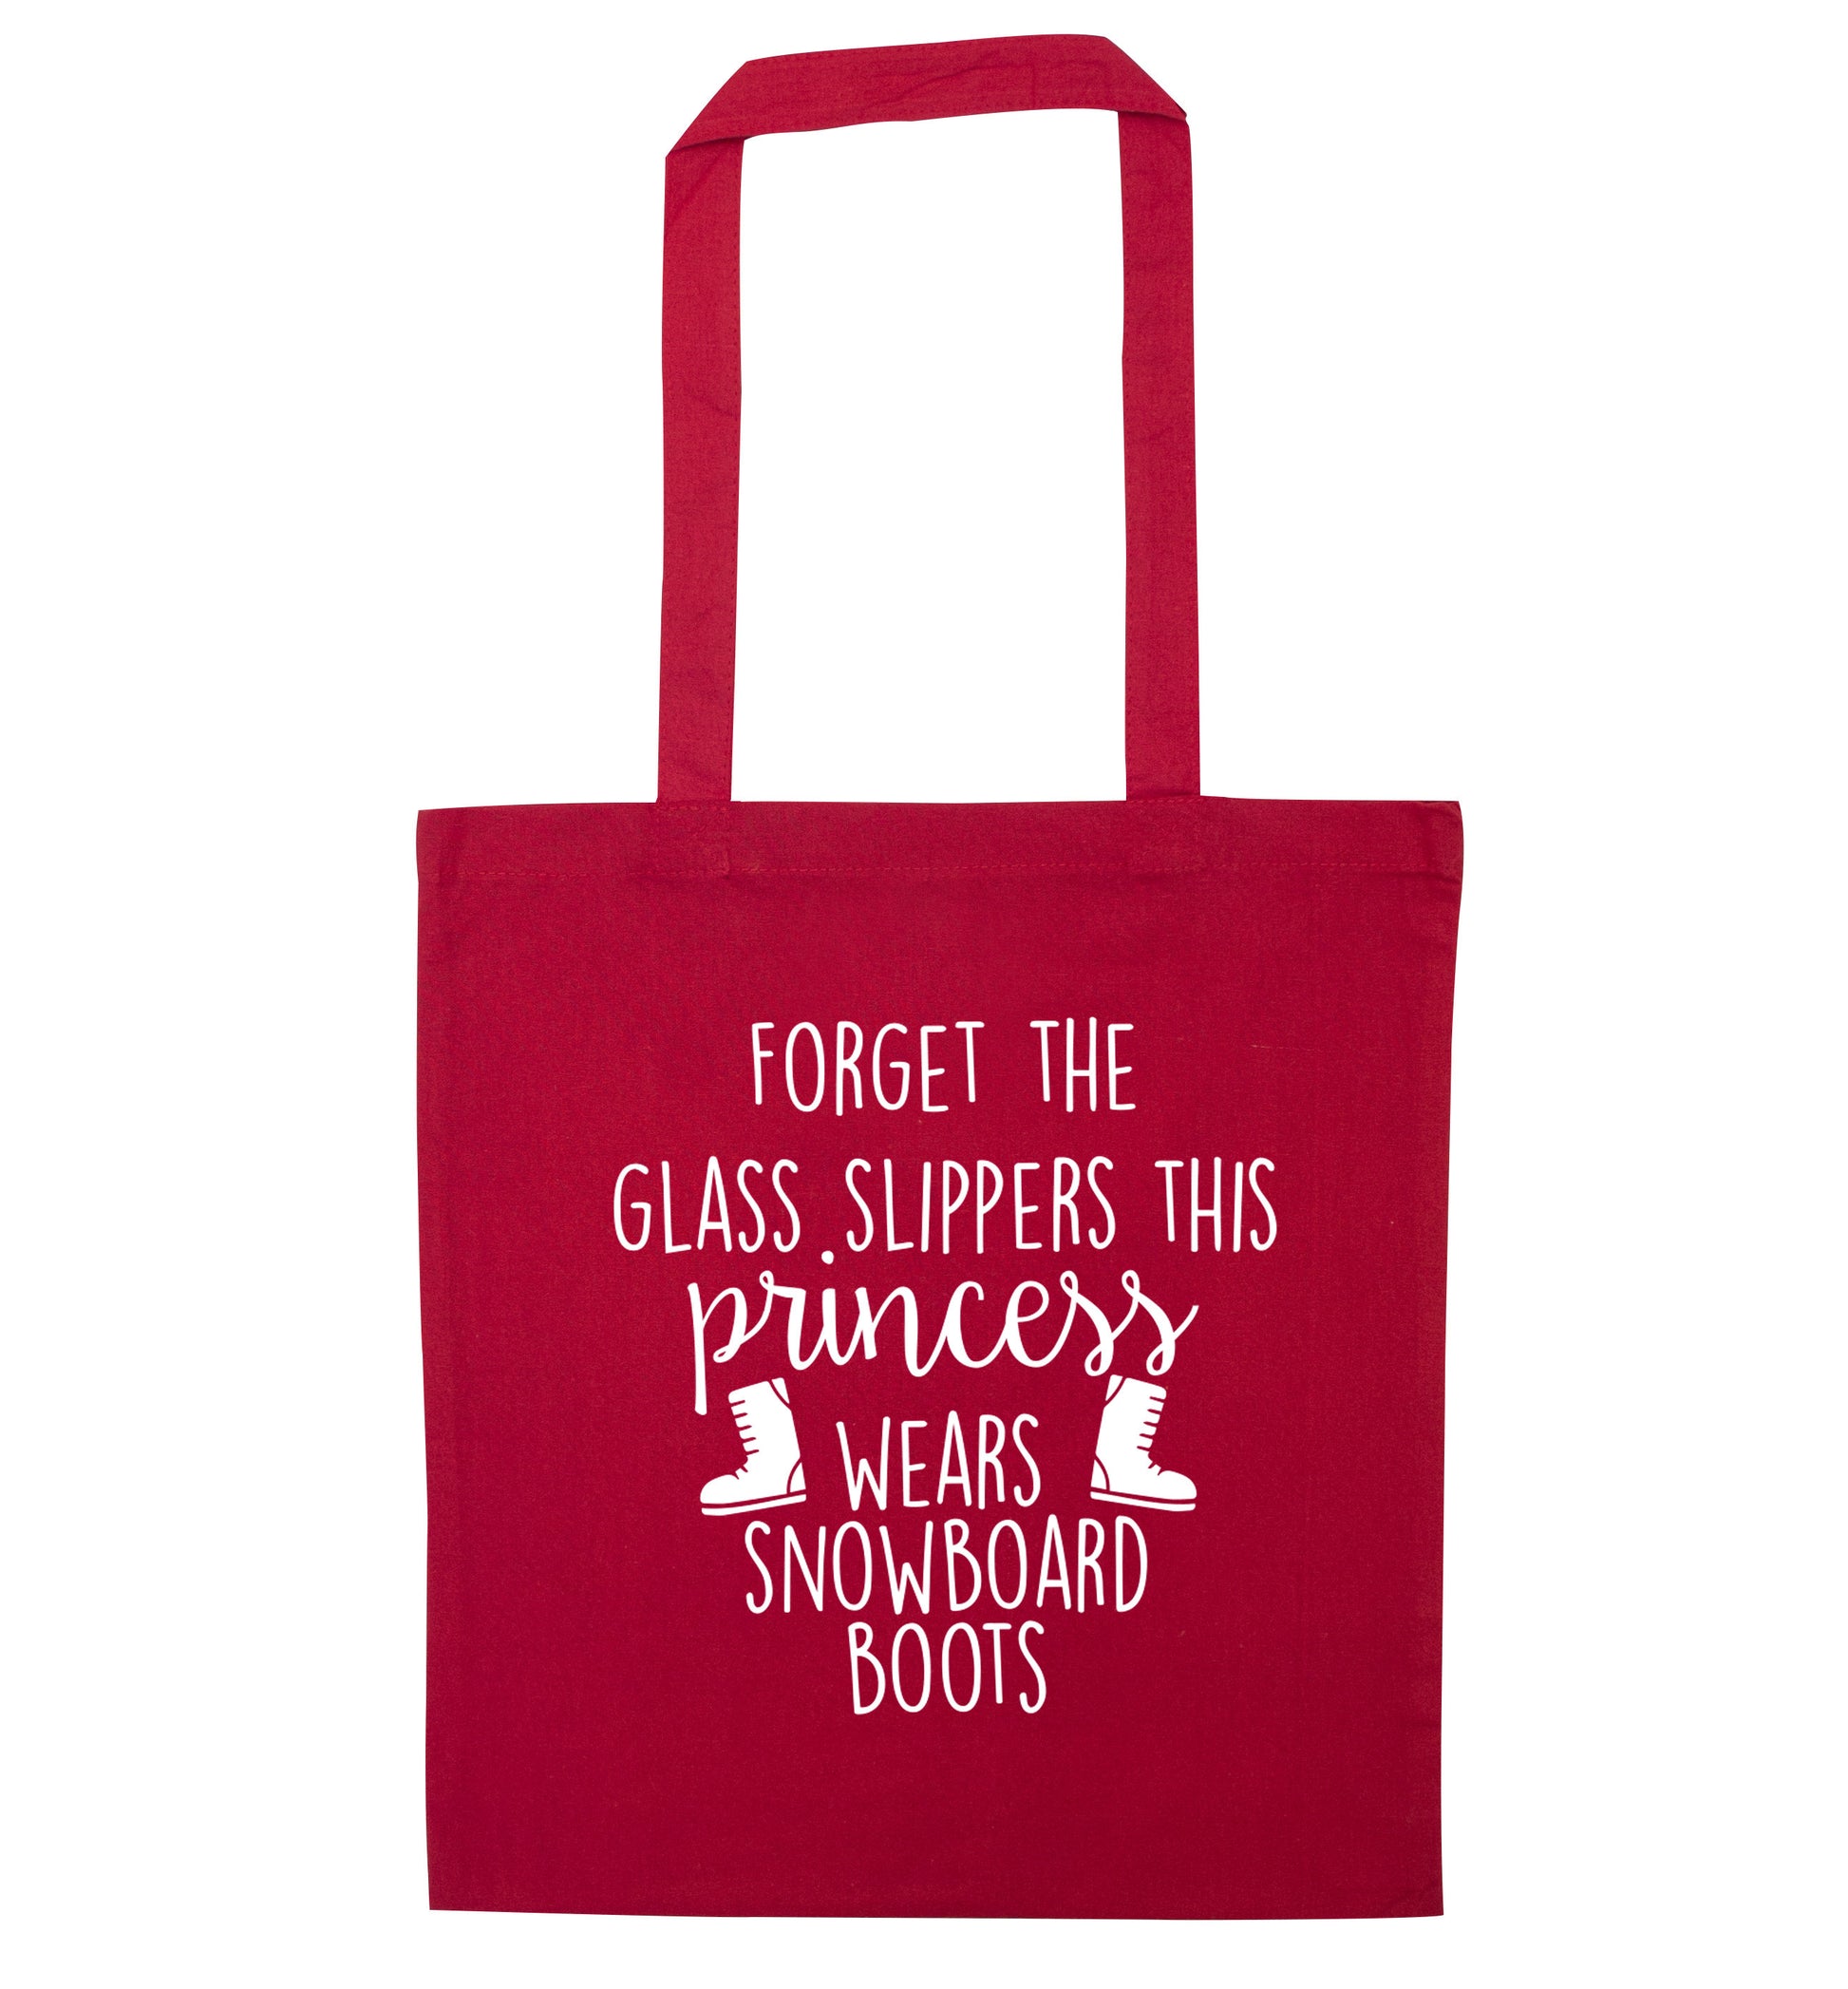 Forget the glass slippers this princess wears snowboard boots red tote bag